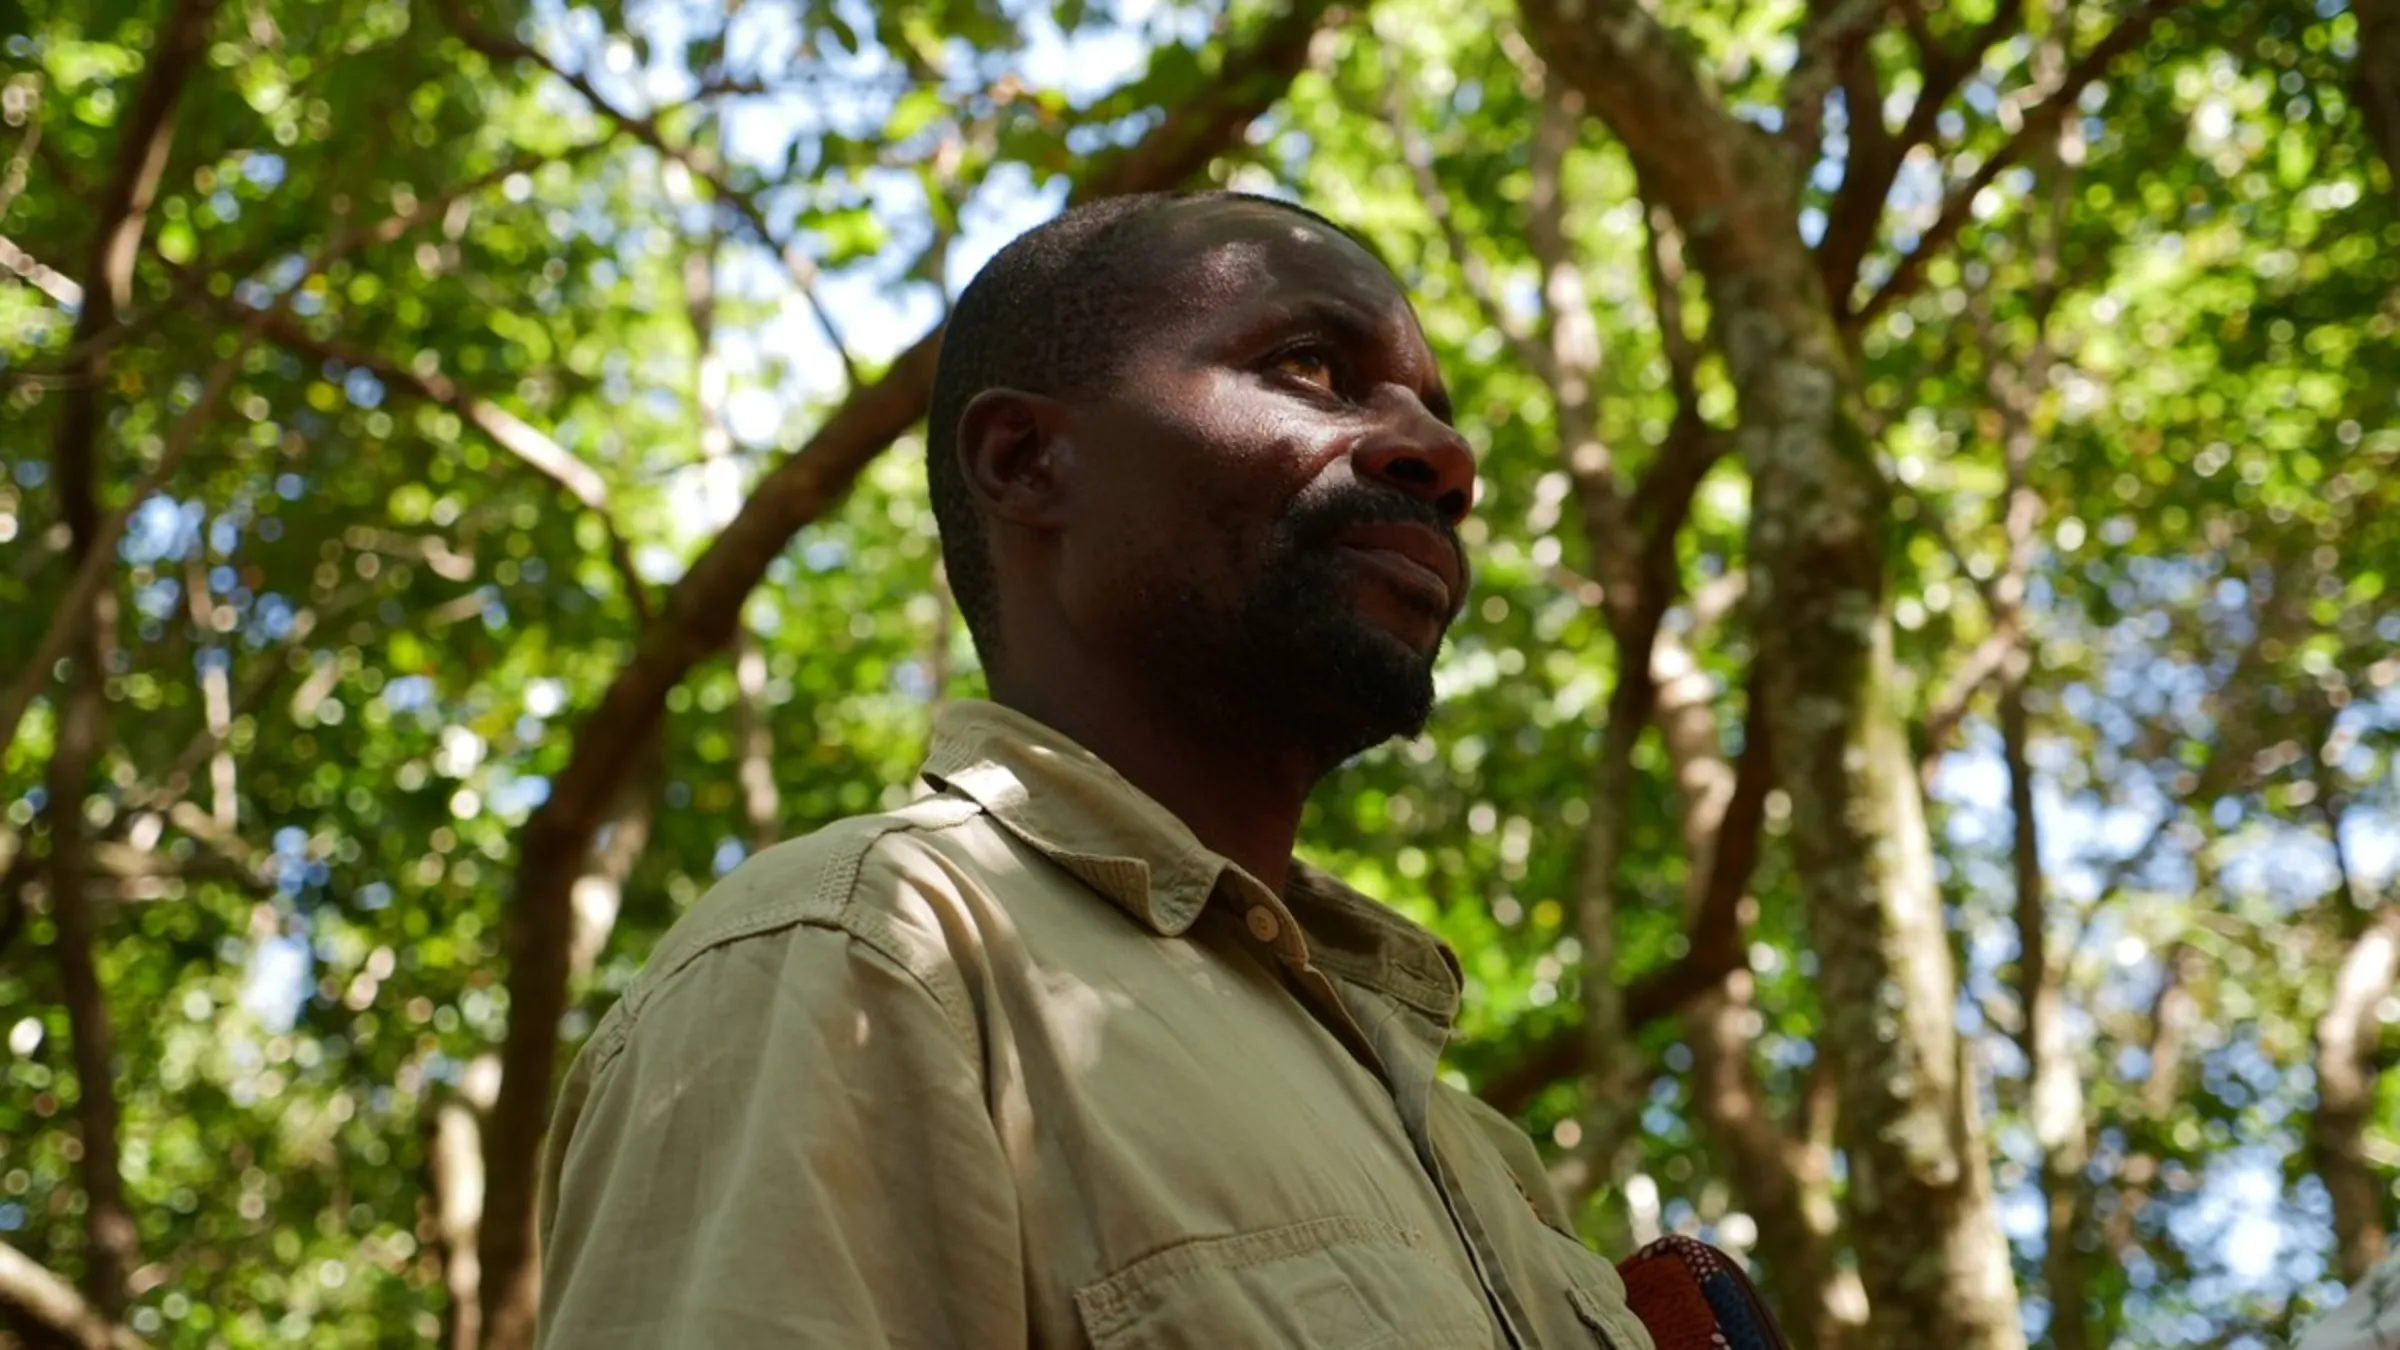 Julius Samuel, who helps lead a coffee-growing project on Mount Gorongosa, Mozambique, stands beneath indigenous trees growing over the tree nursery on the mountain, May 26, 2022